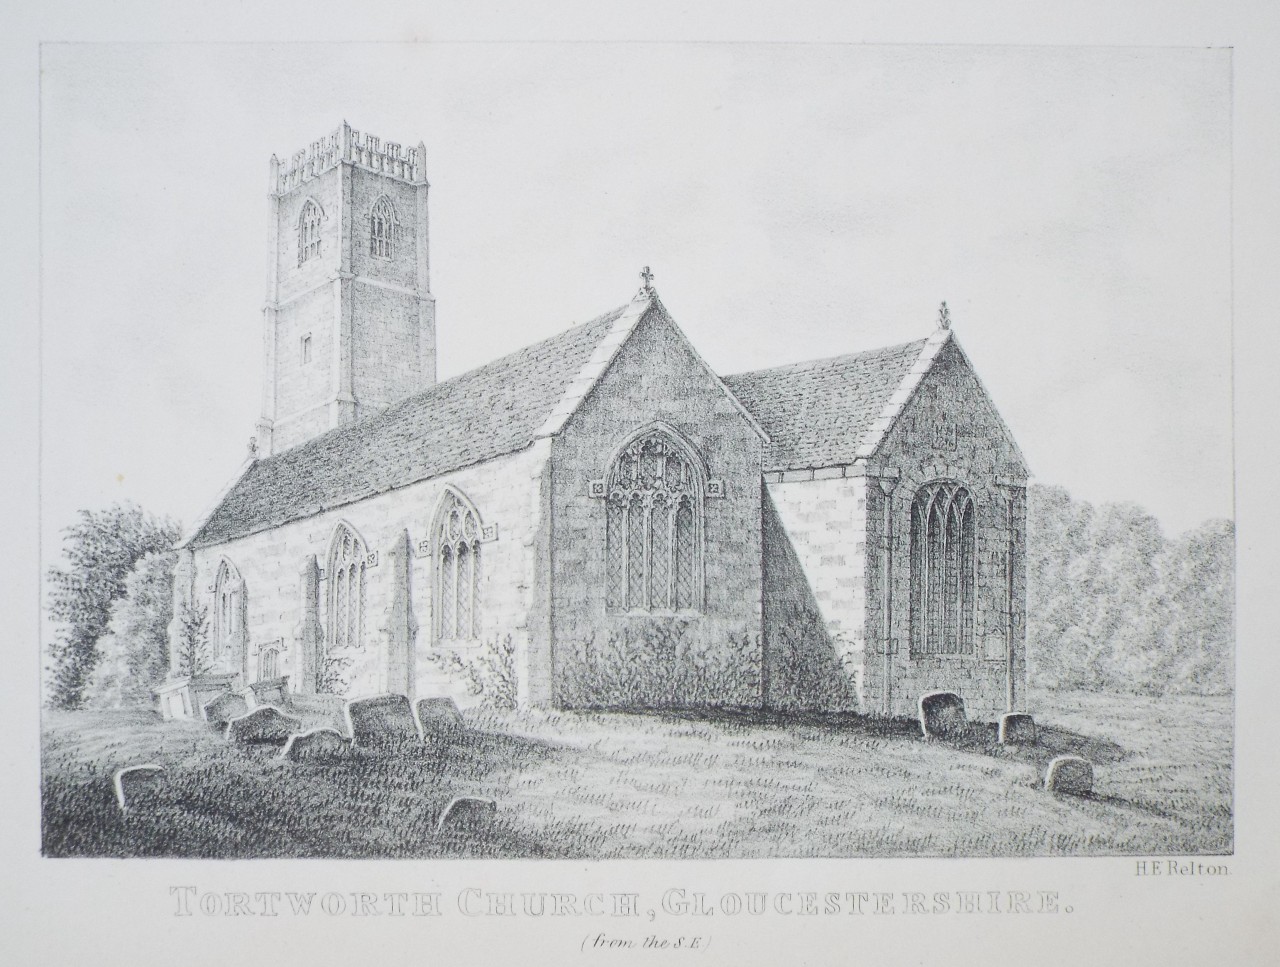 Zinc Lithograph - Tortworth Church, Gloucestershire. (from the S.E.) - Relton